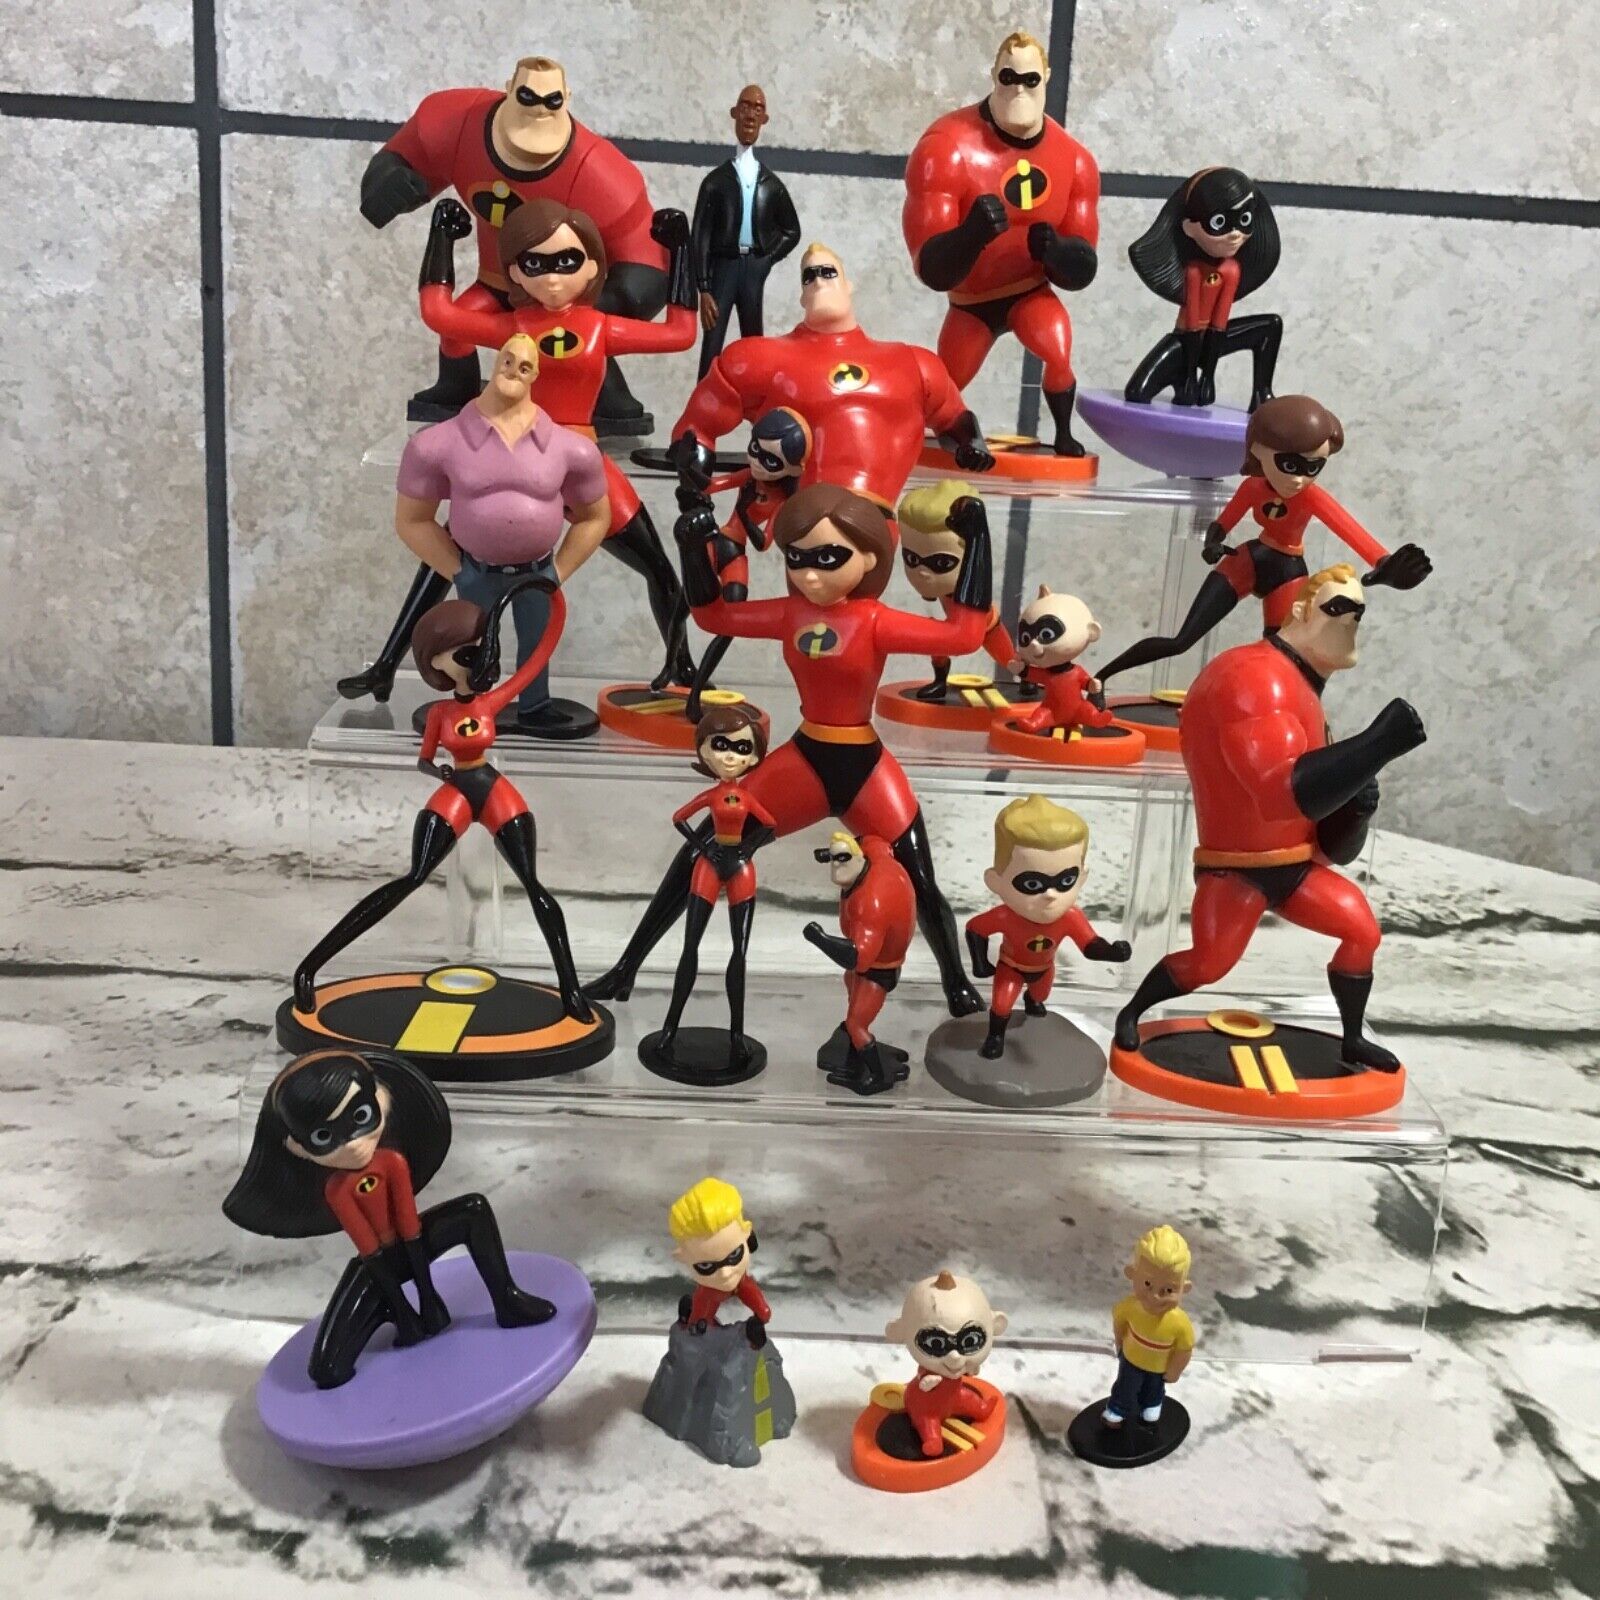 Disney Pixar Incredibles Figures Toys Lot of 21 Assorted Characters